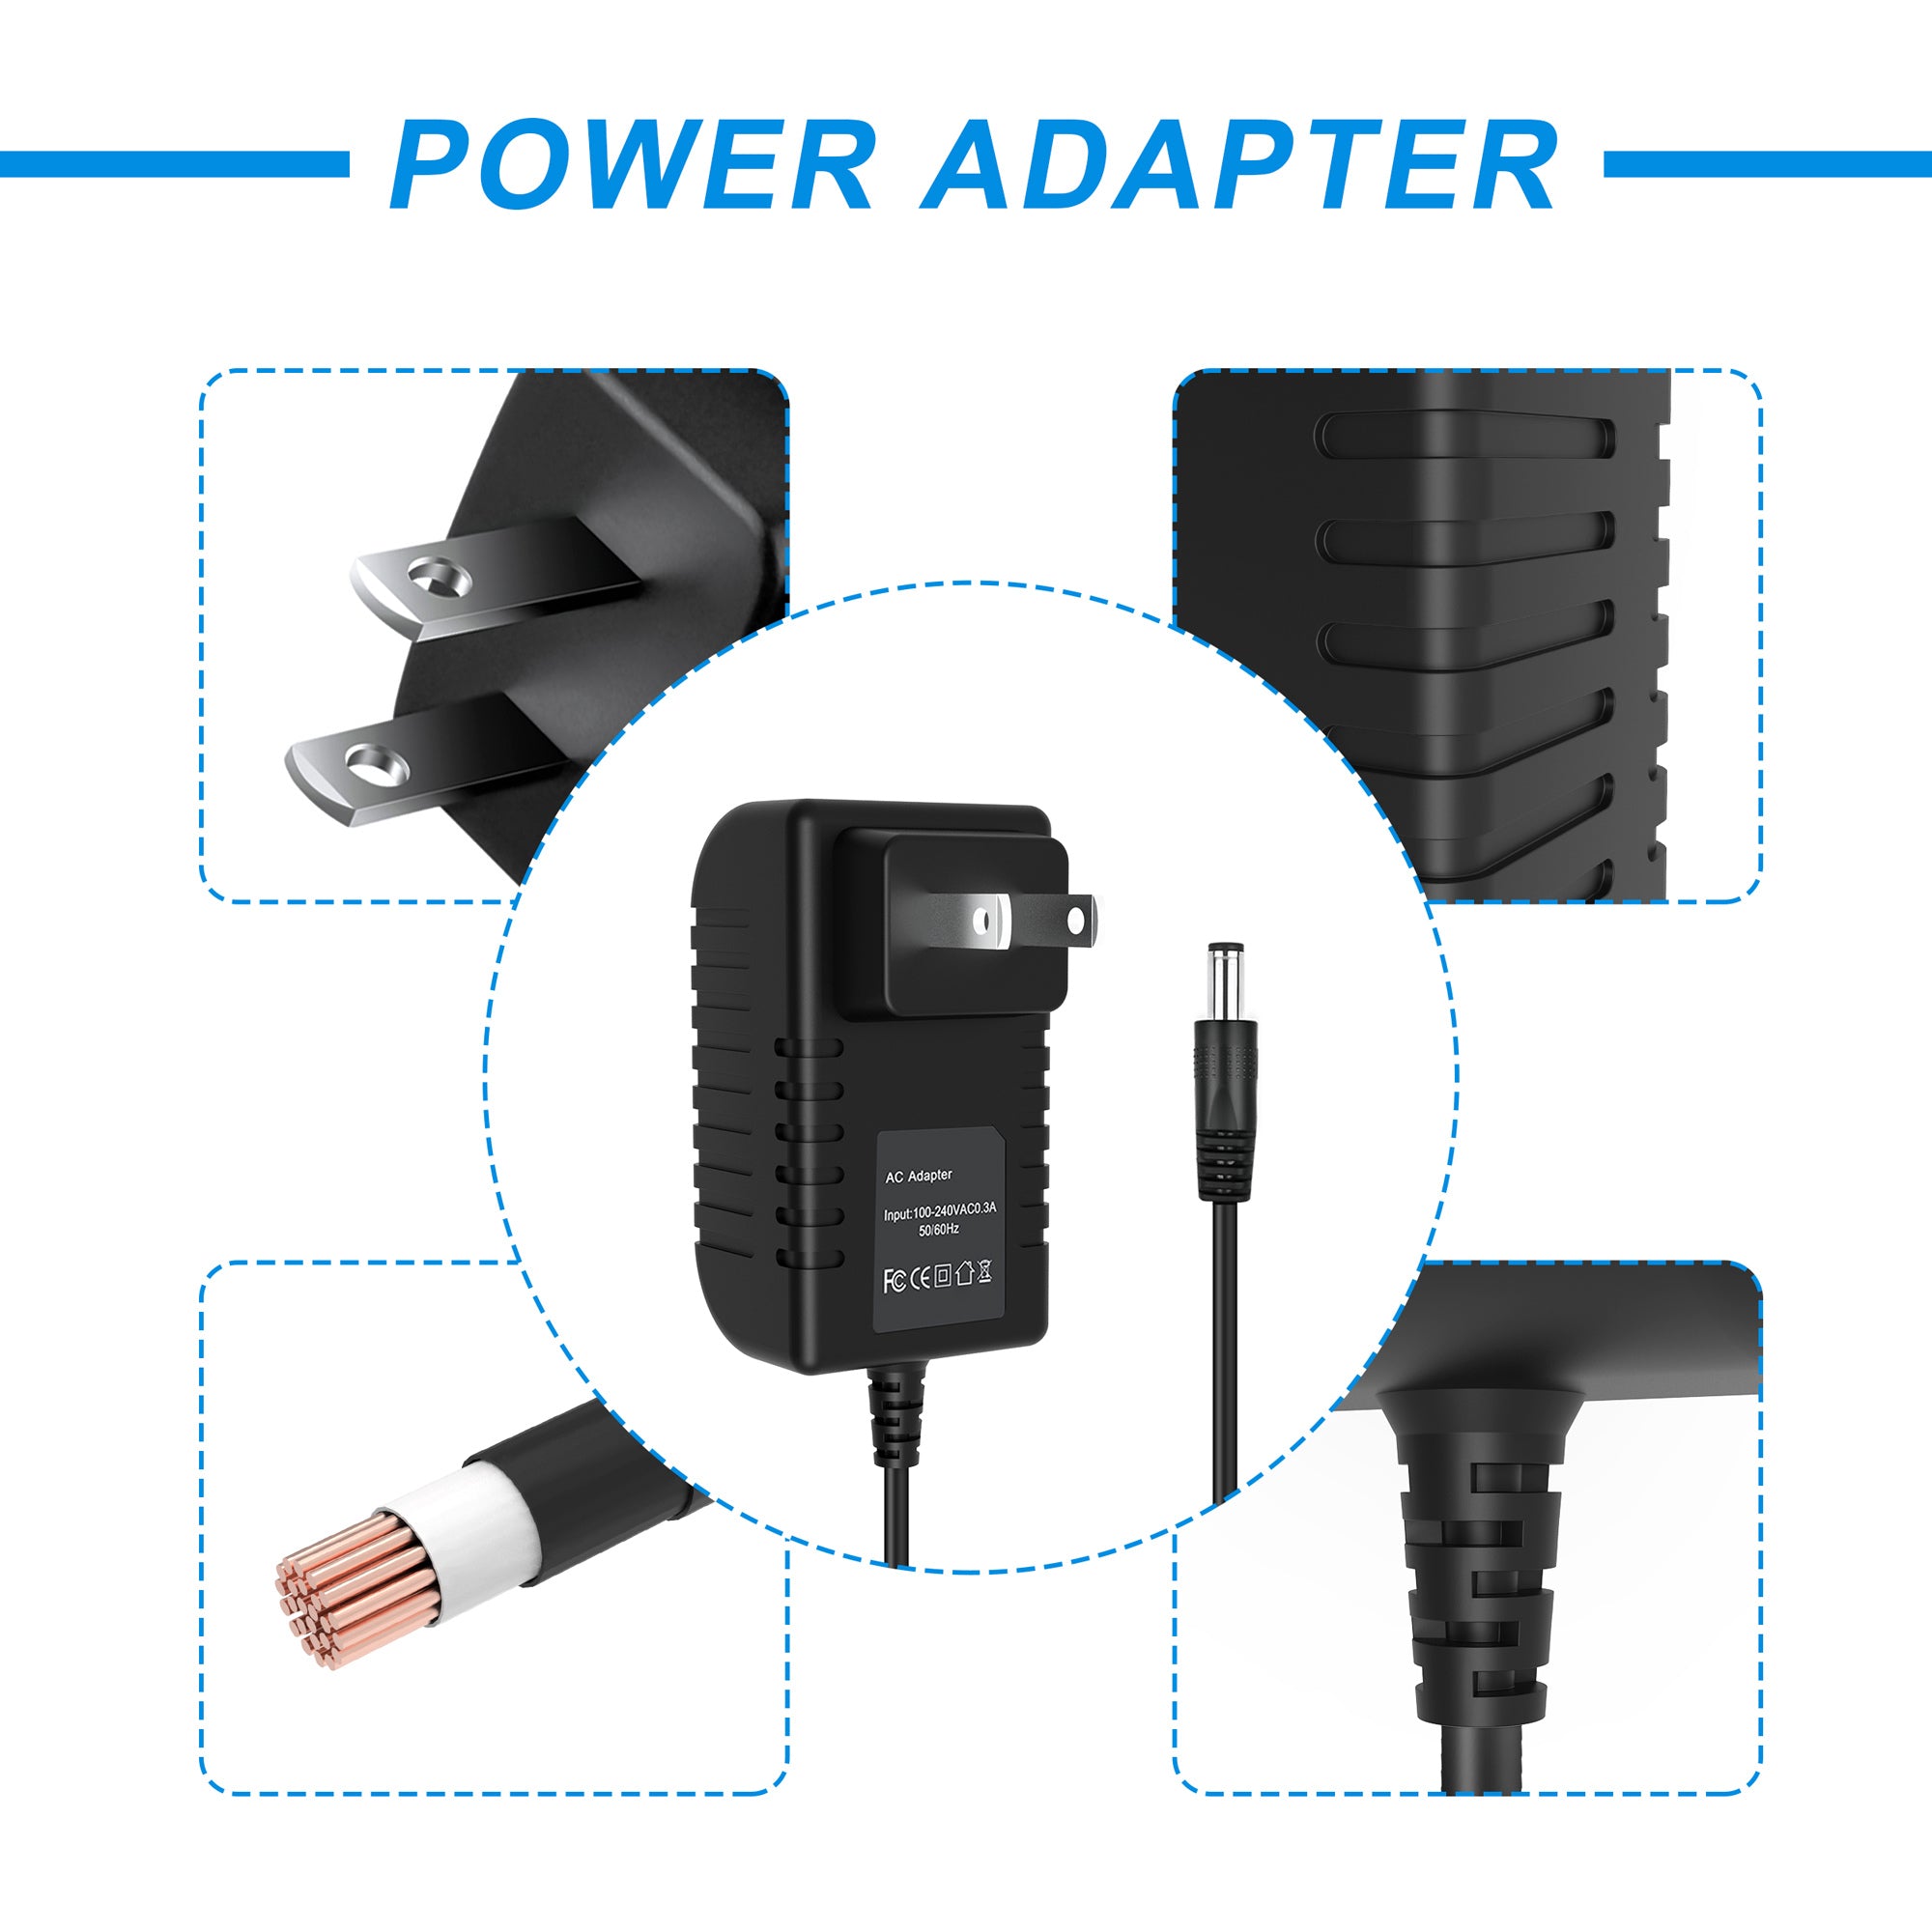 AbleGrid AC Adapter Compatible with MINICOM CAT5 1VS23004 1VS23003 VGA/DATA TRANSMITTER REMOTE Display Broadcaster Extender Charger Power Supply Cord Charger PSU